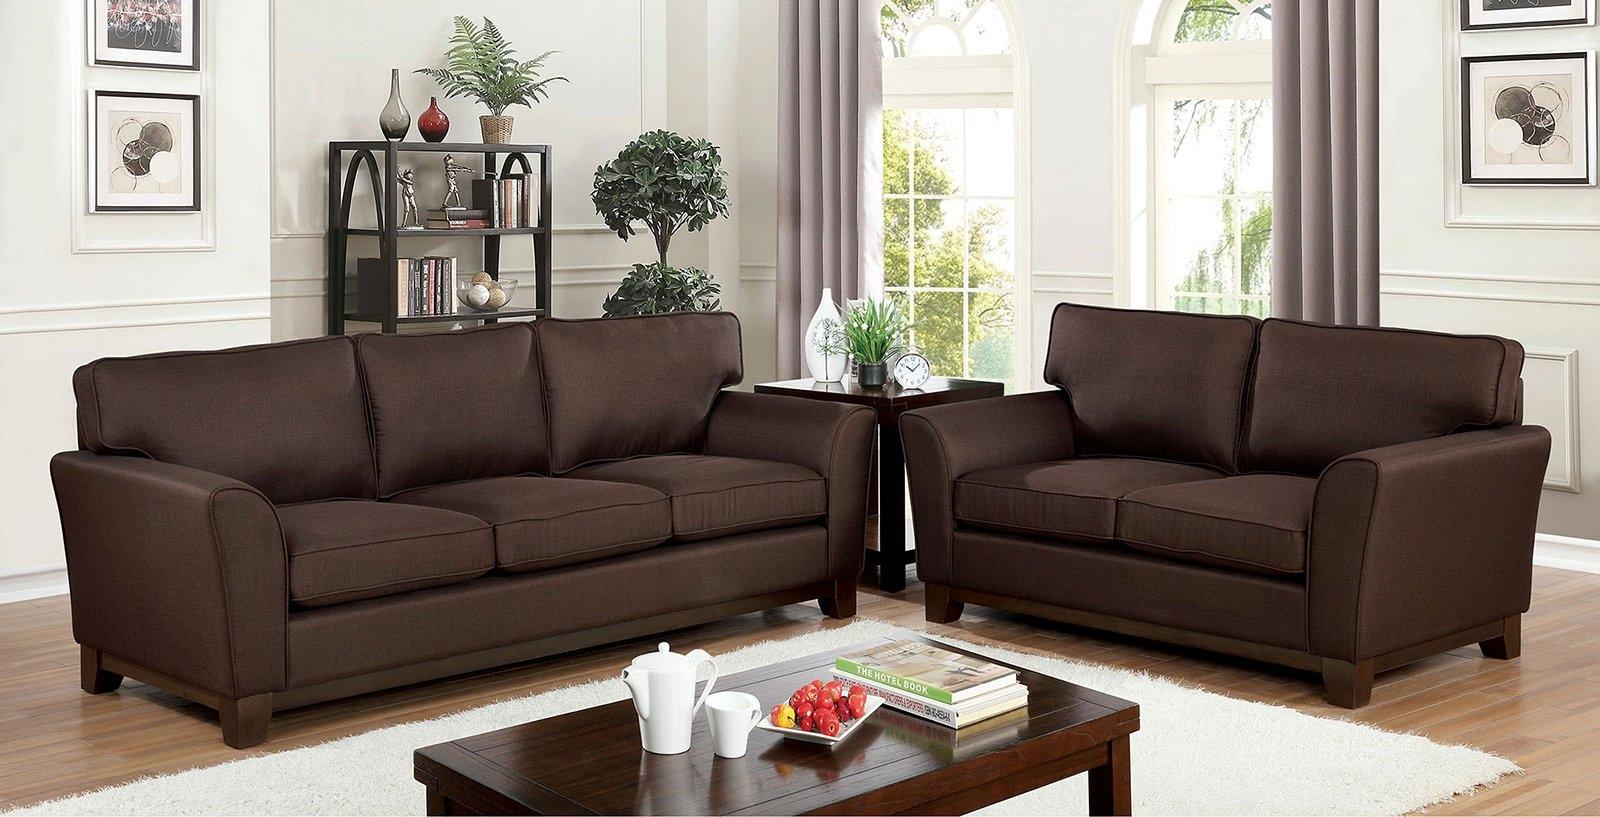 Transitional Sofa and Loveseat Set CM6954BR-2PC Caldicot CM6954BR-2PC in Brown Chenille